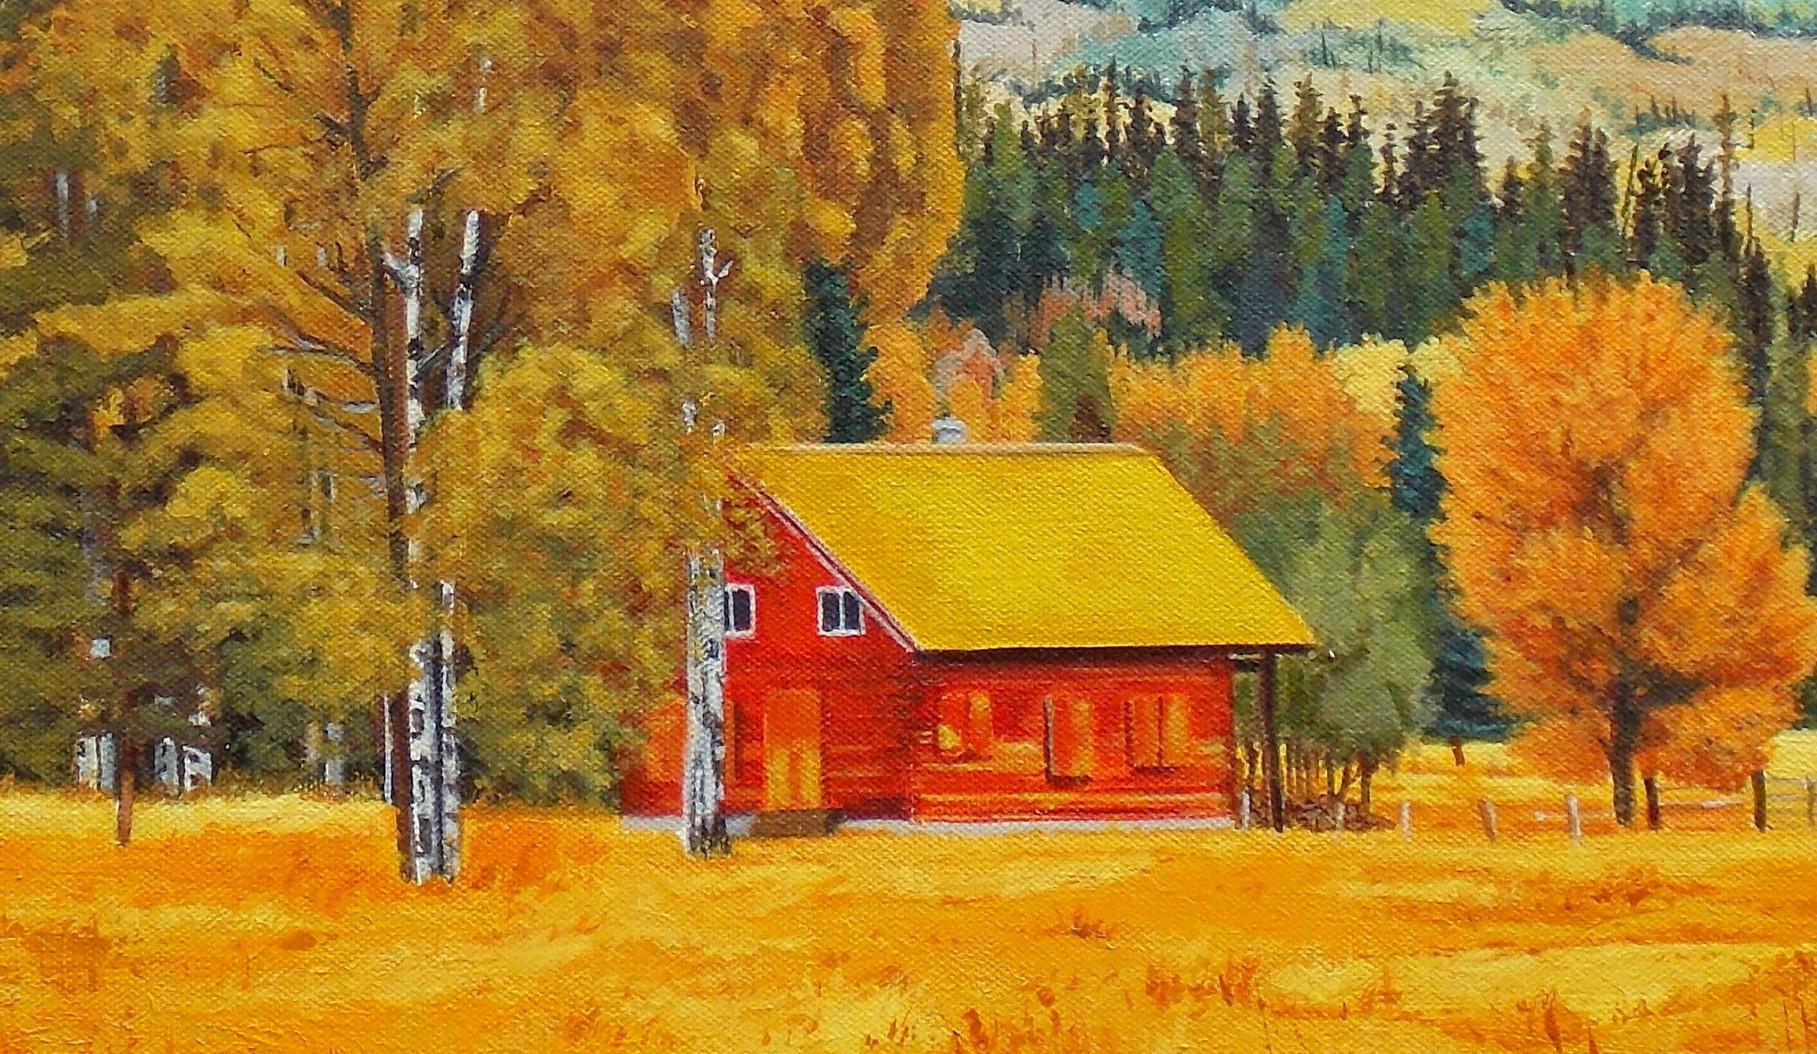 The Red Cabin, Original Painting - American Realist Art by John Jaster